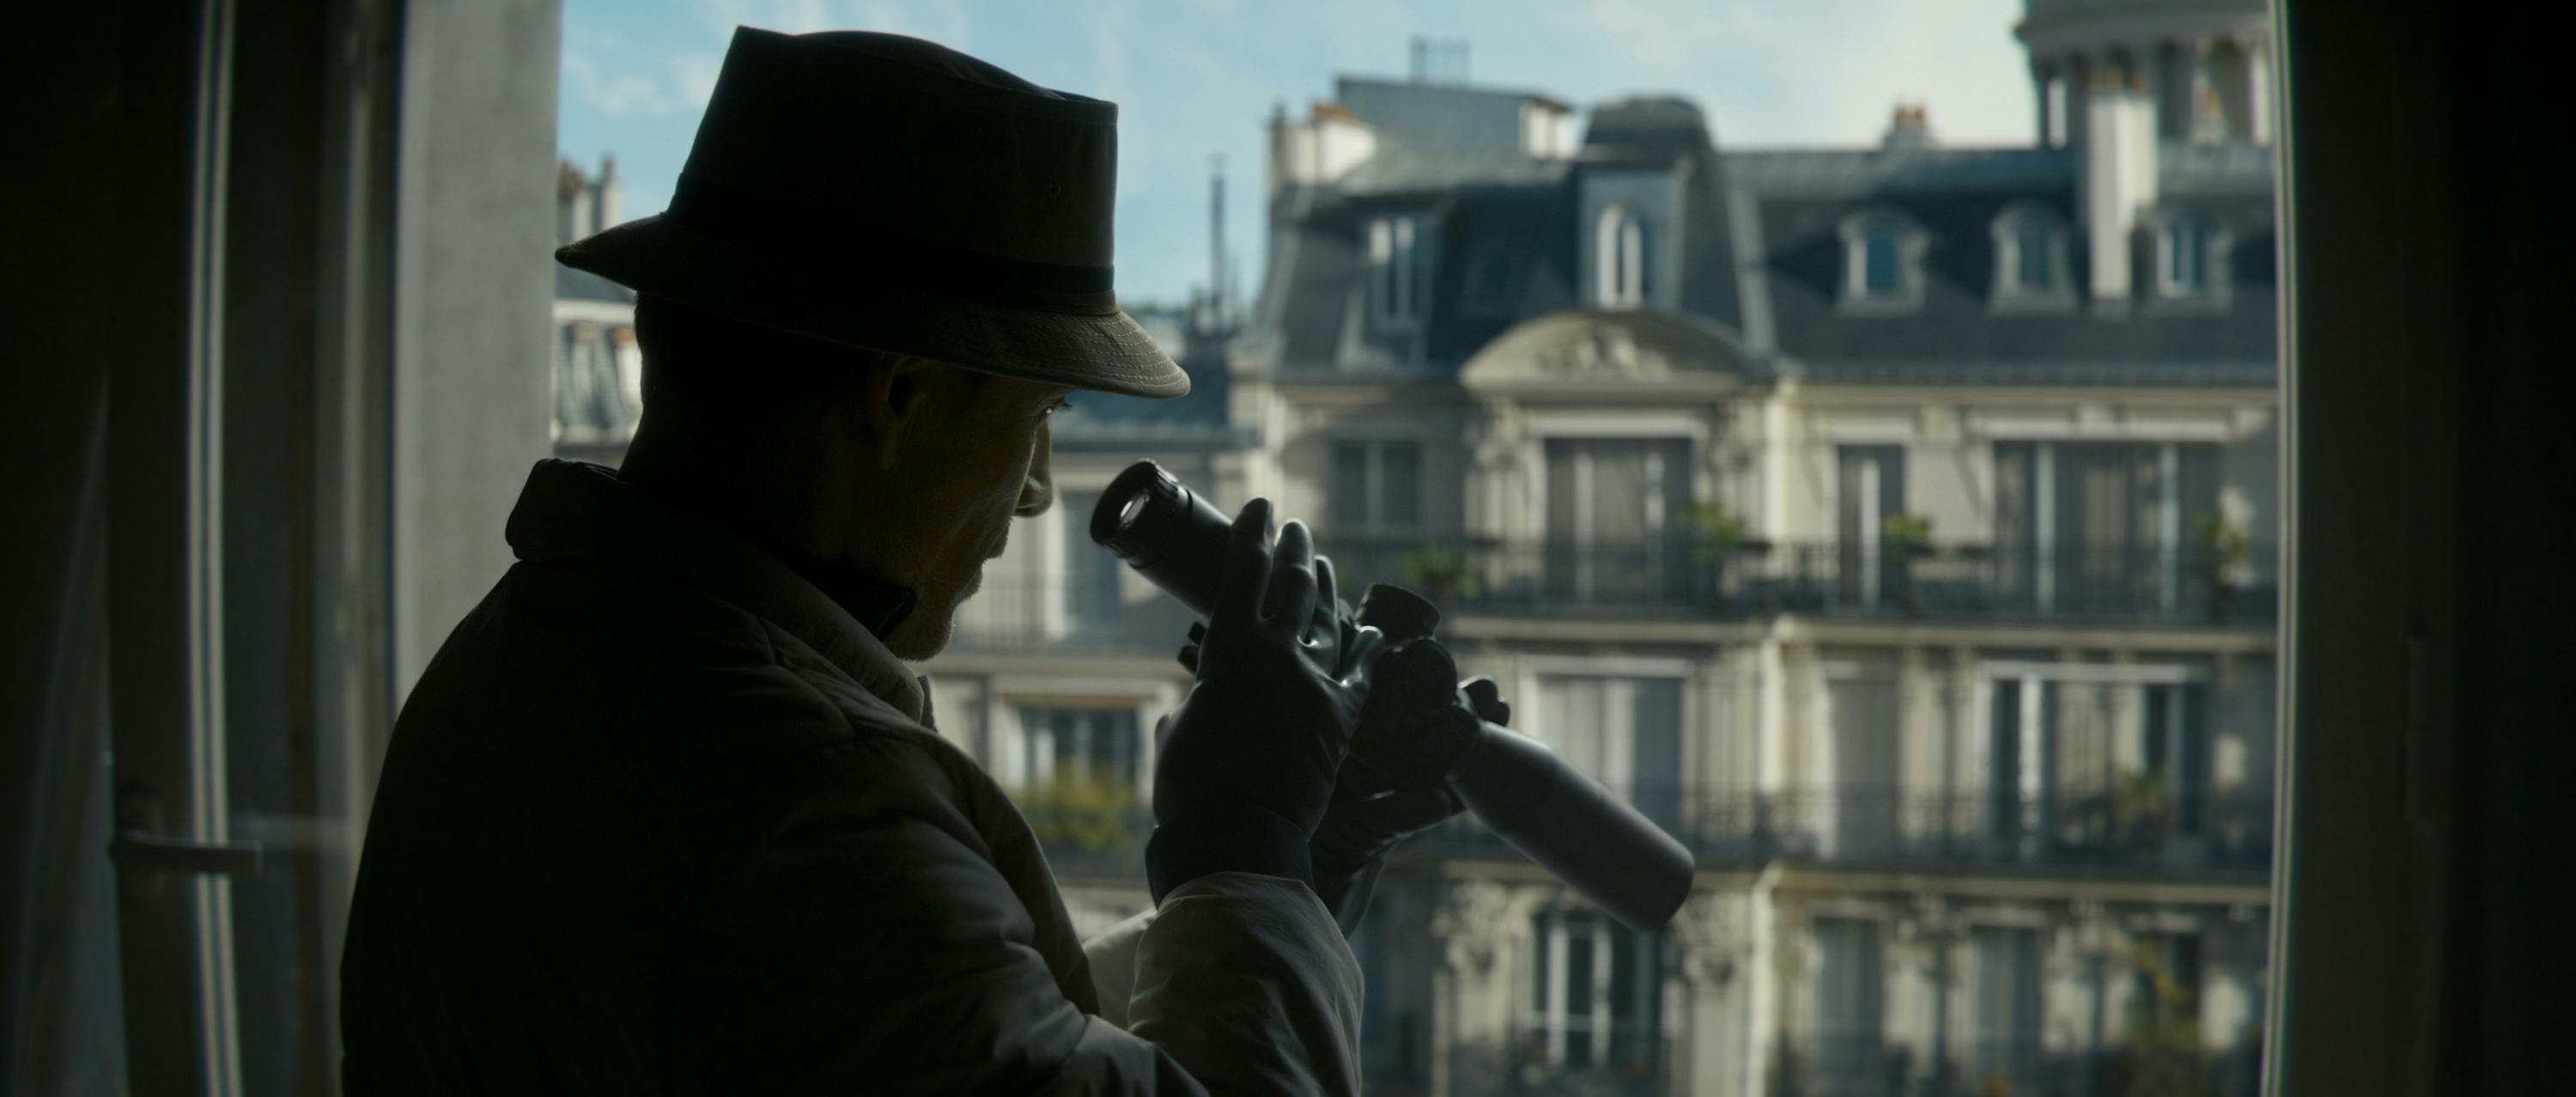 The Killer (Michael Fassbender) looks through a scope and wears a trench coat and a bucket hat.